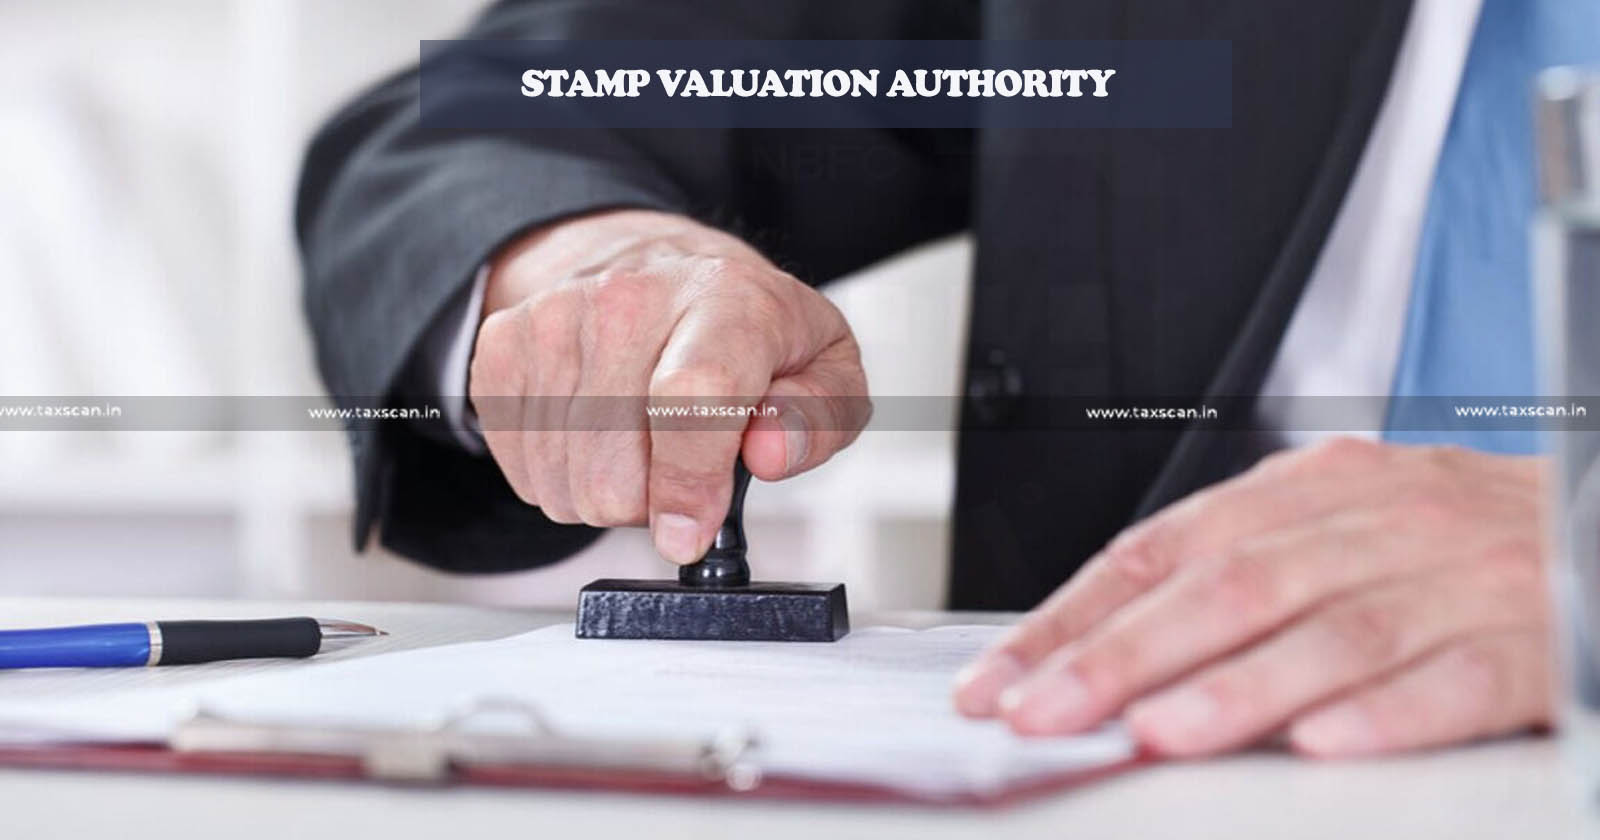 Income Tax - ITAT - ITAT Ahmedabad - Stamp authority valuation - Sale consideration - taxscan